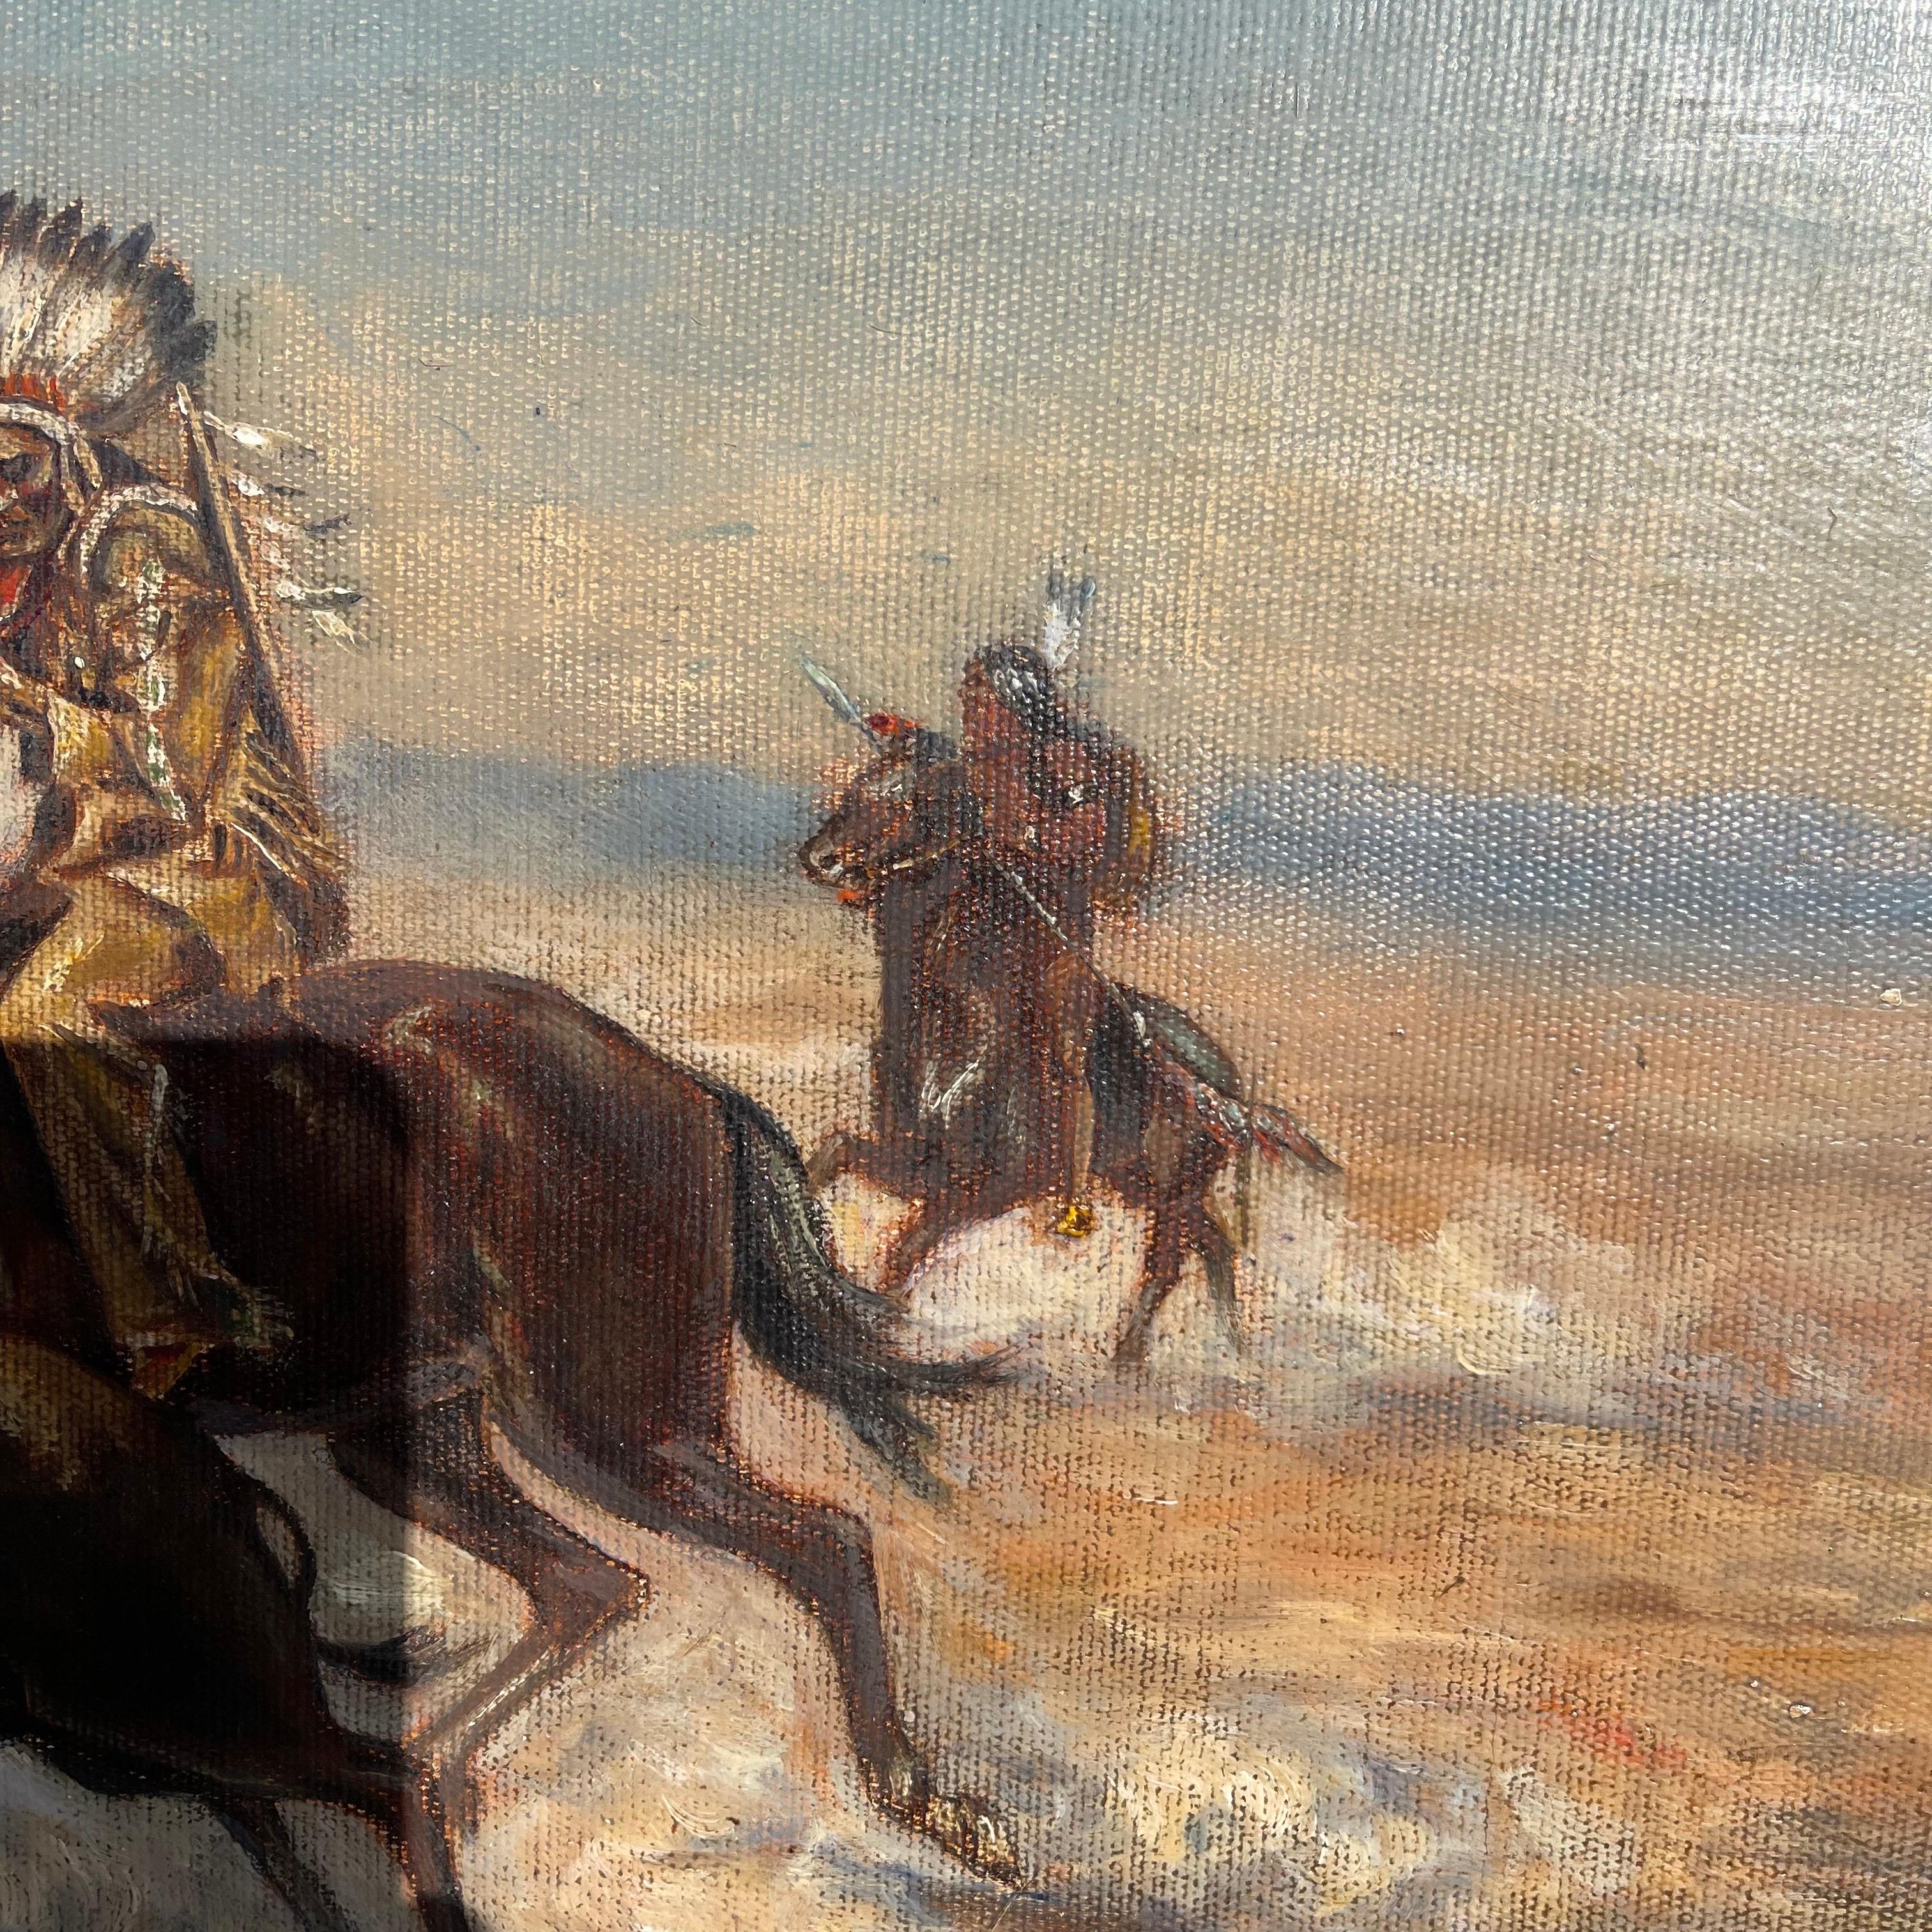 American West Native Hunting Painting After “Doomed” by Charles Schreyvogel For Sale 1